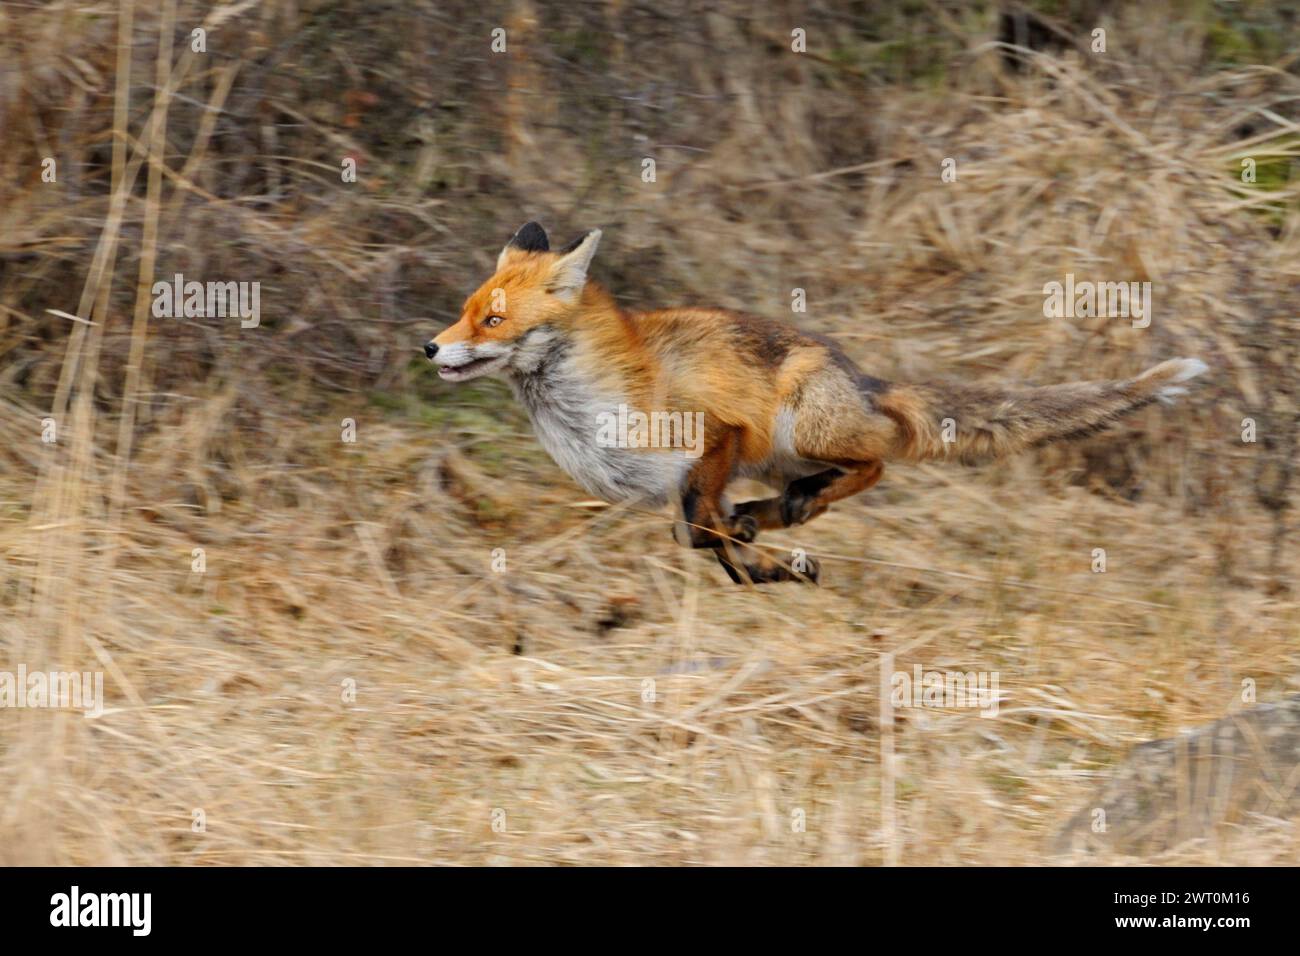 Red Fox ( Vulpes vulpes ) on the run along the edge of a forest, through reed grass, fleeing animal, in motion, panning technique, wildlife, Europe. Stock Photo